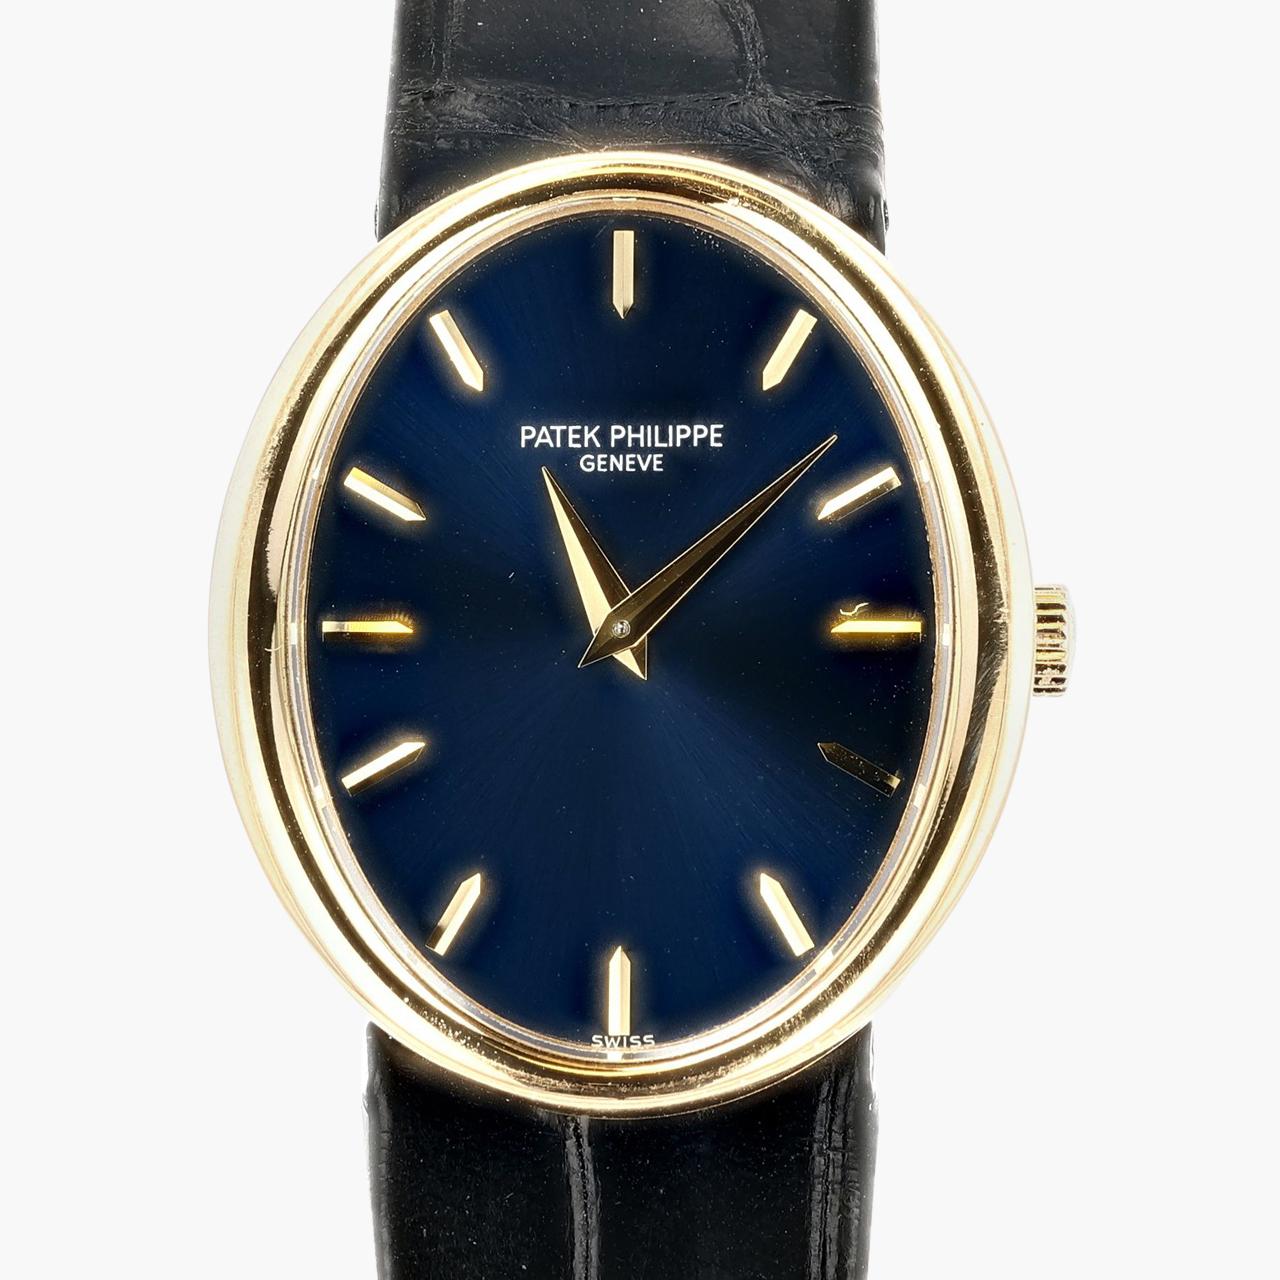 This iconic watch features a classic Patek Philippe design. The watch is in mint condition and comes complete with box, papers. Small size.  The watch was recently serviced at Patek Philippe. 